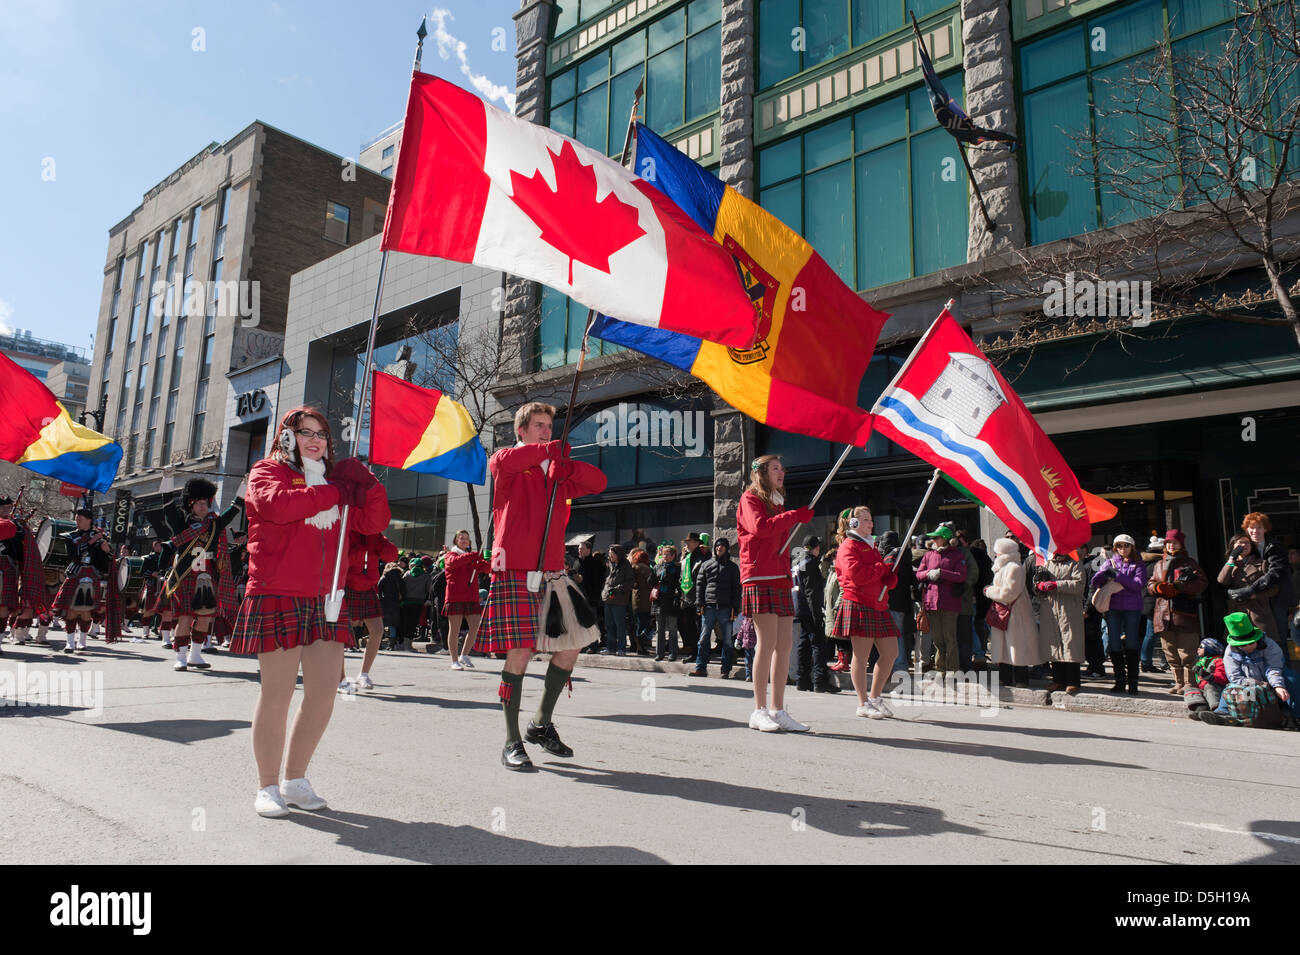 Flag bearers parading during the Saint Patrick's day parade in Montreal, province of Quebec, Canada. Stock Photo